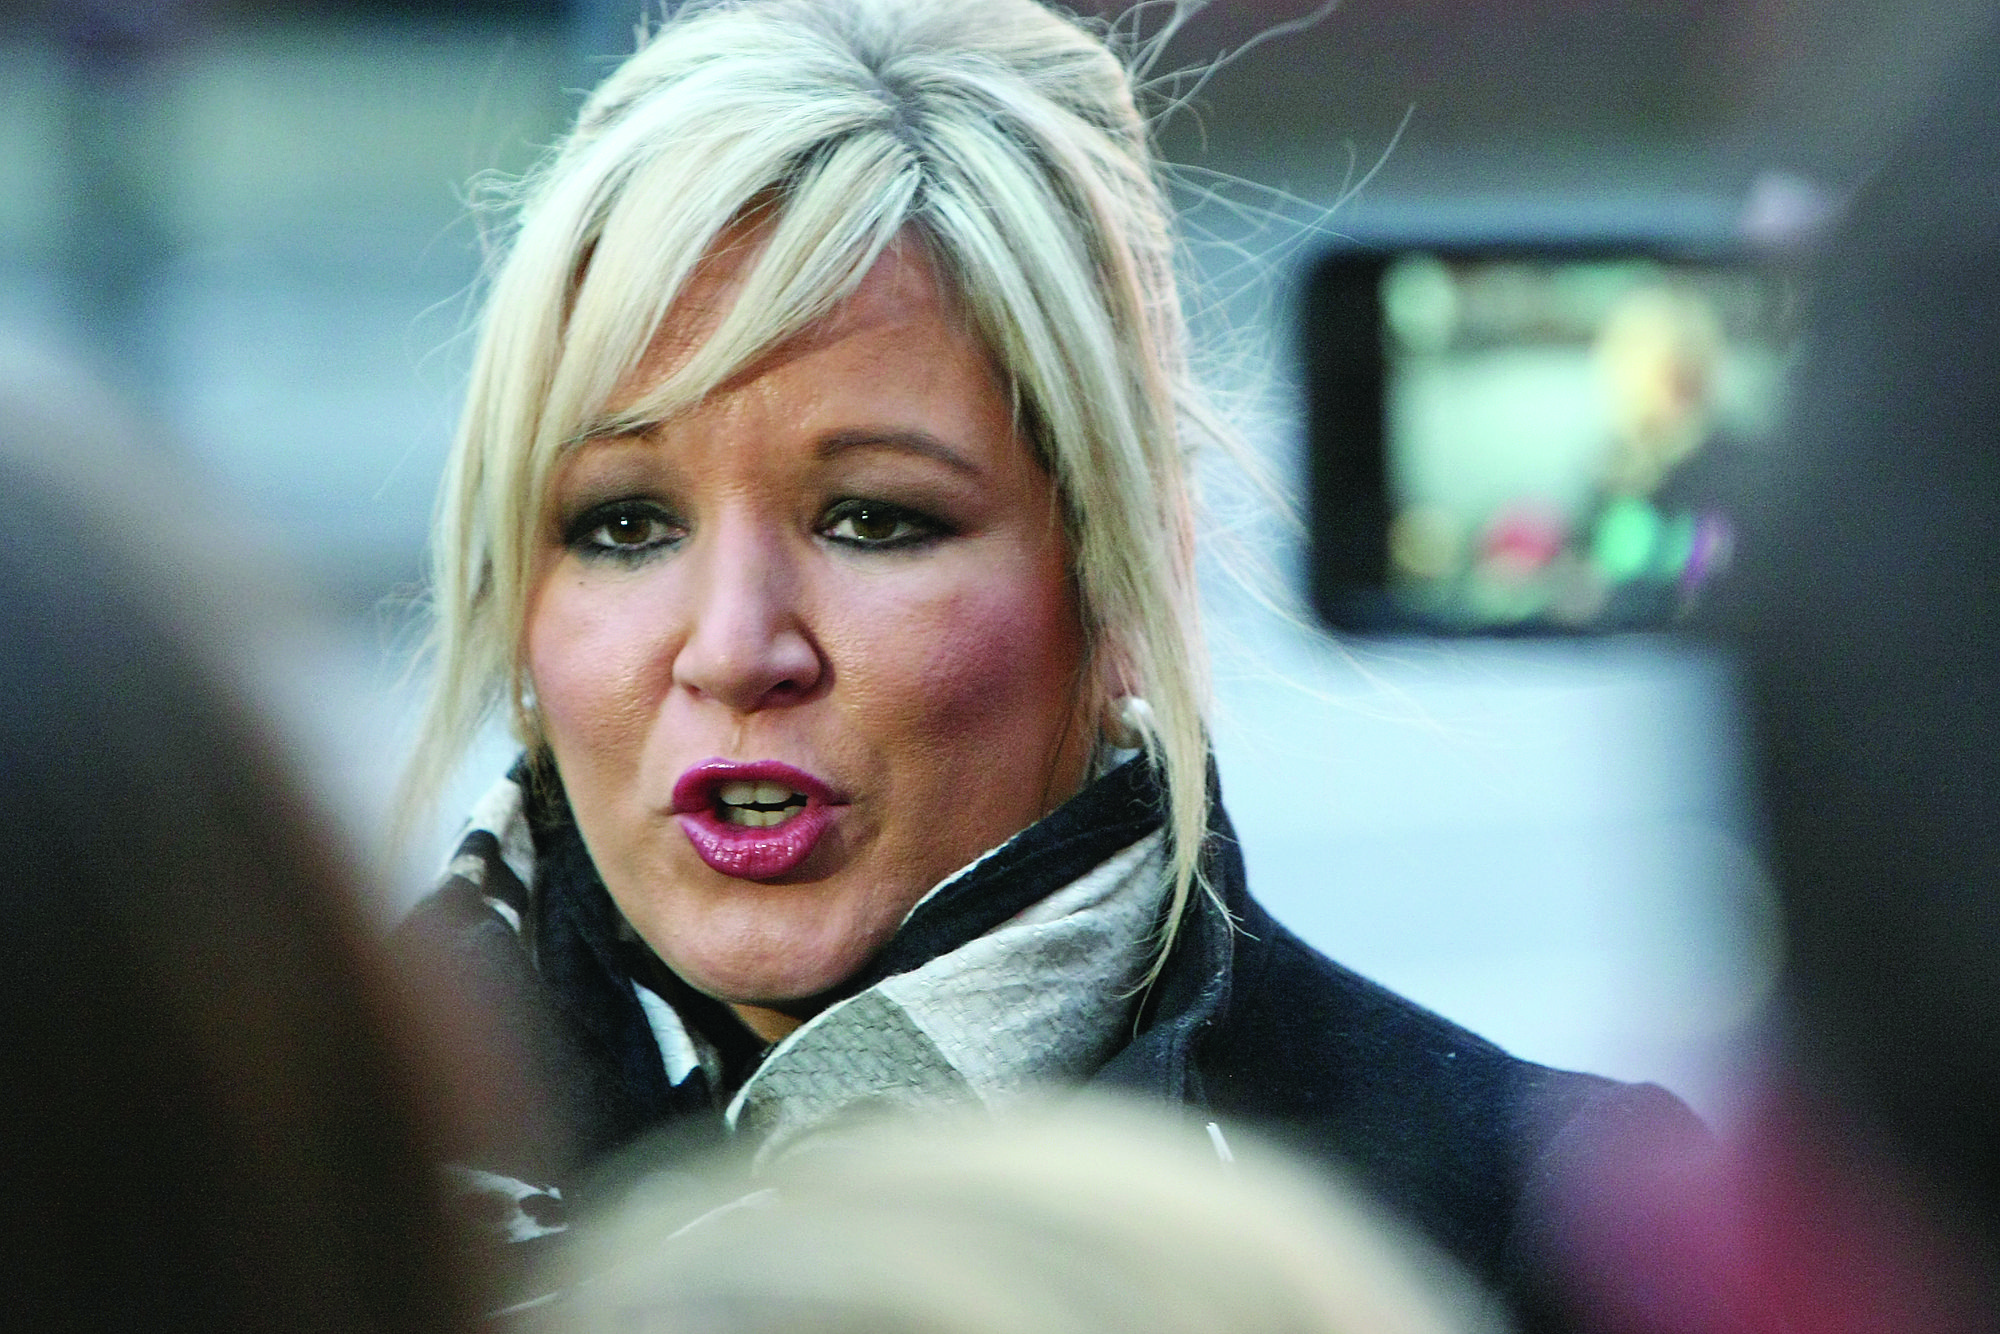 ALL CHANGE: There was a time when DUP leaders liked to refer to Michelle O\'Neill as \'my deputy\'